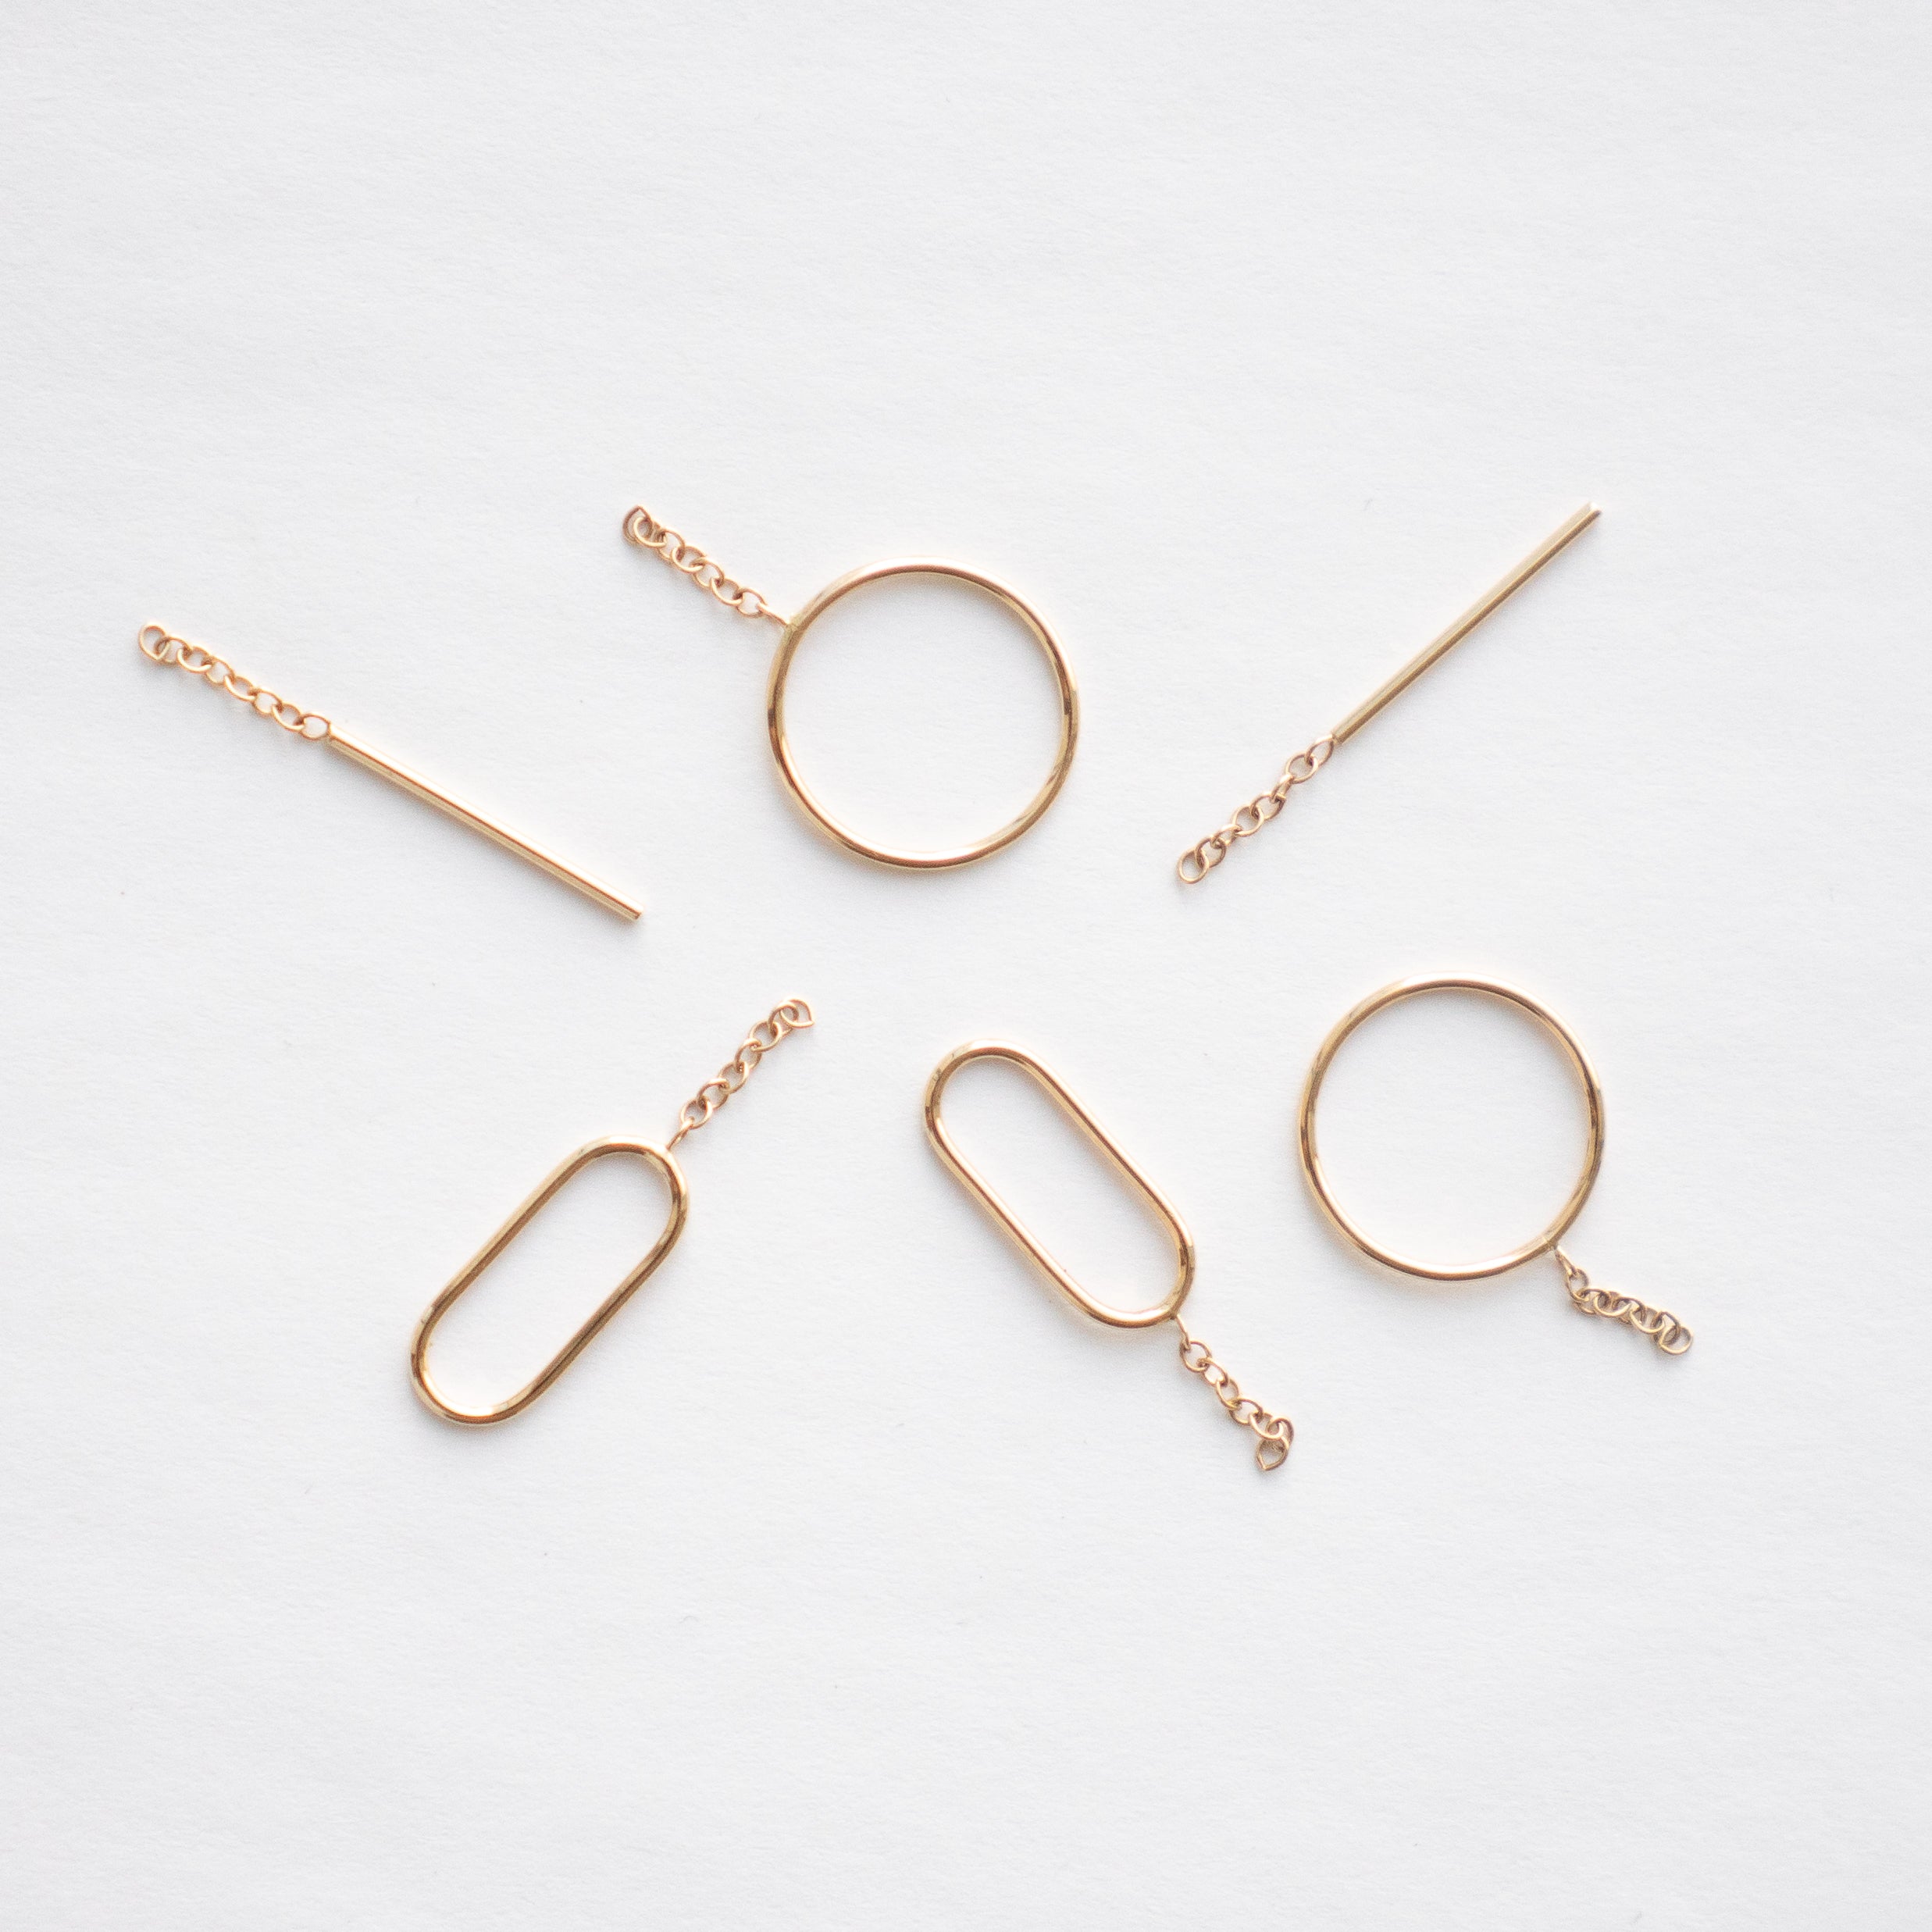 Minimal Bar, Oval, and Circle Earring Enhancers By SHW Fine Jewelry NYC